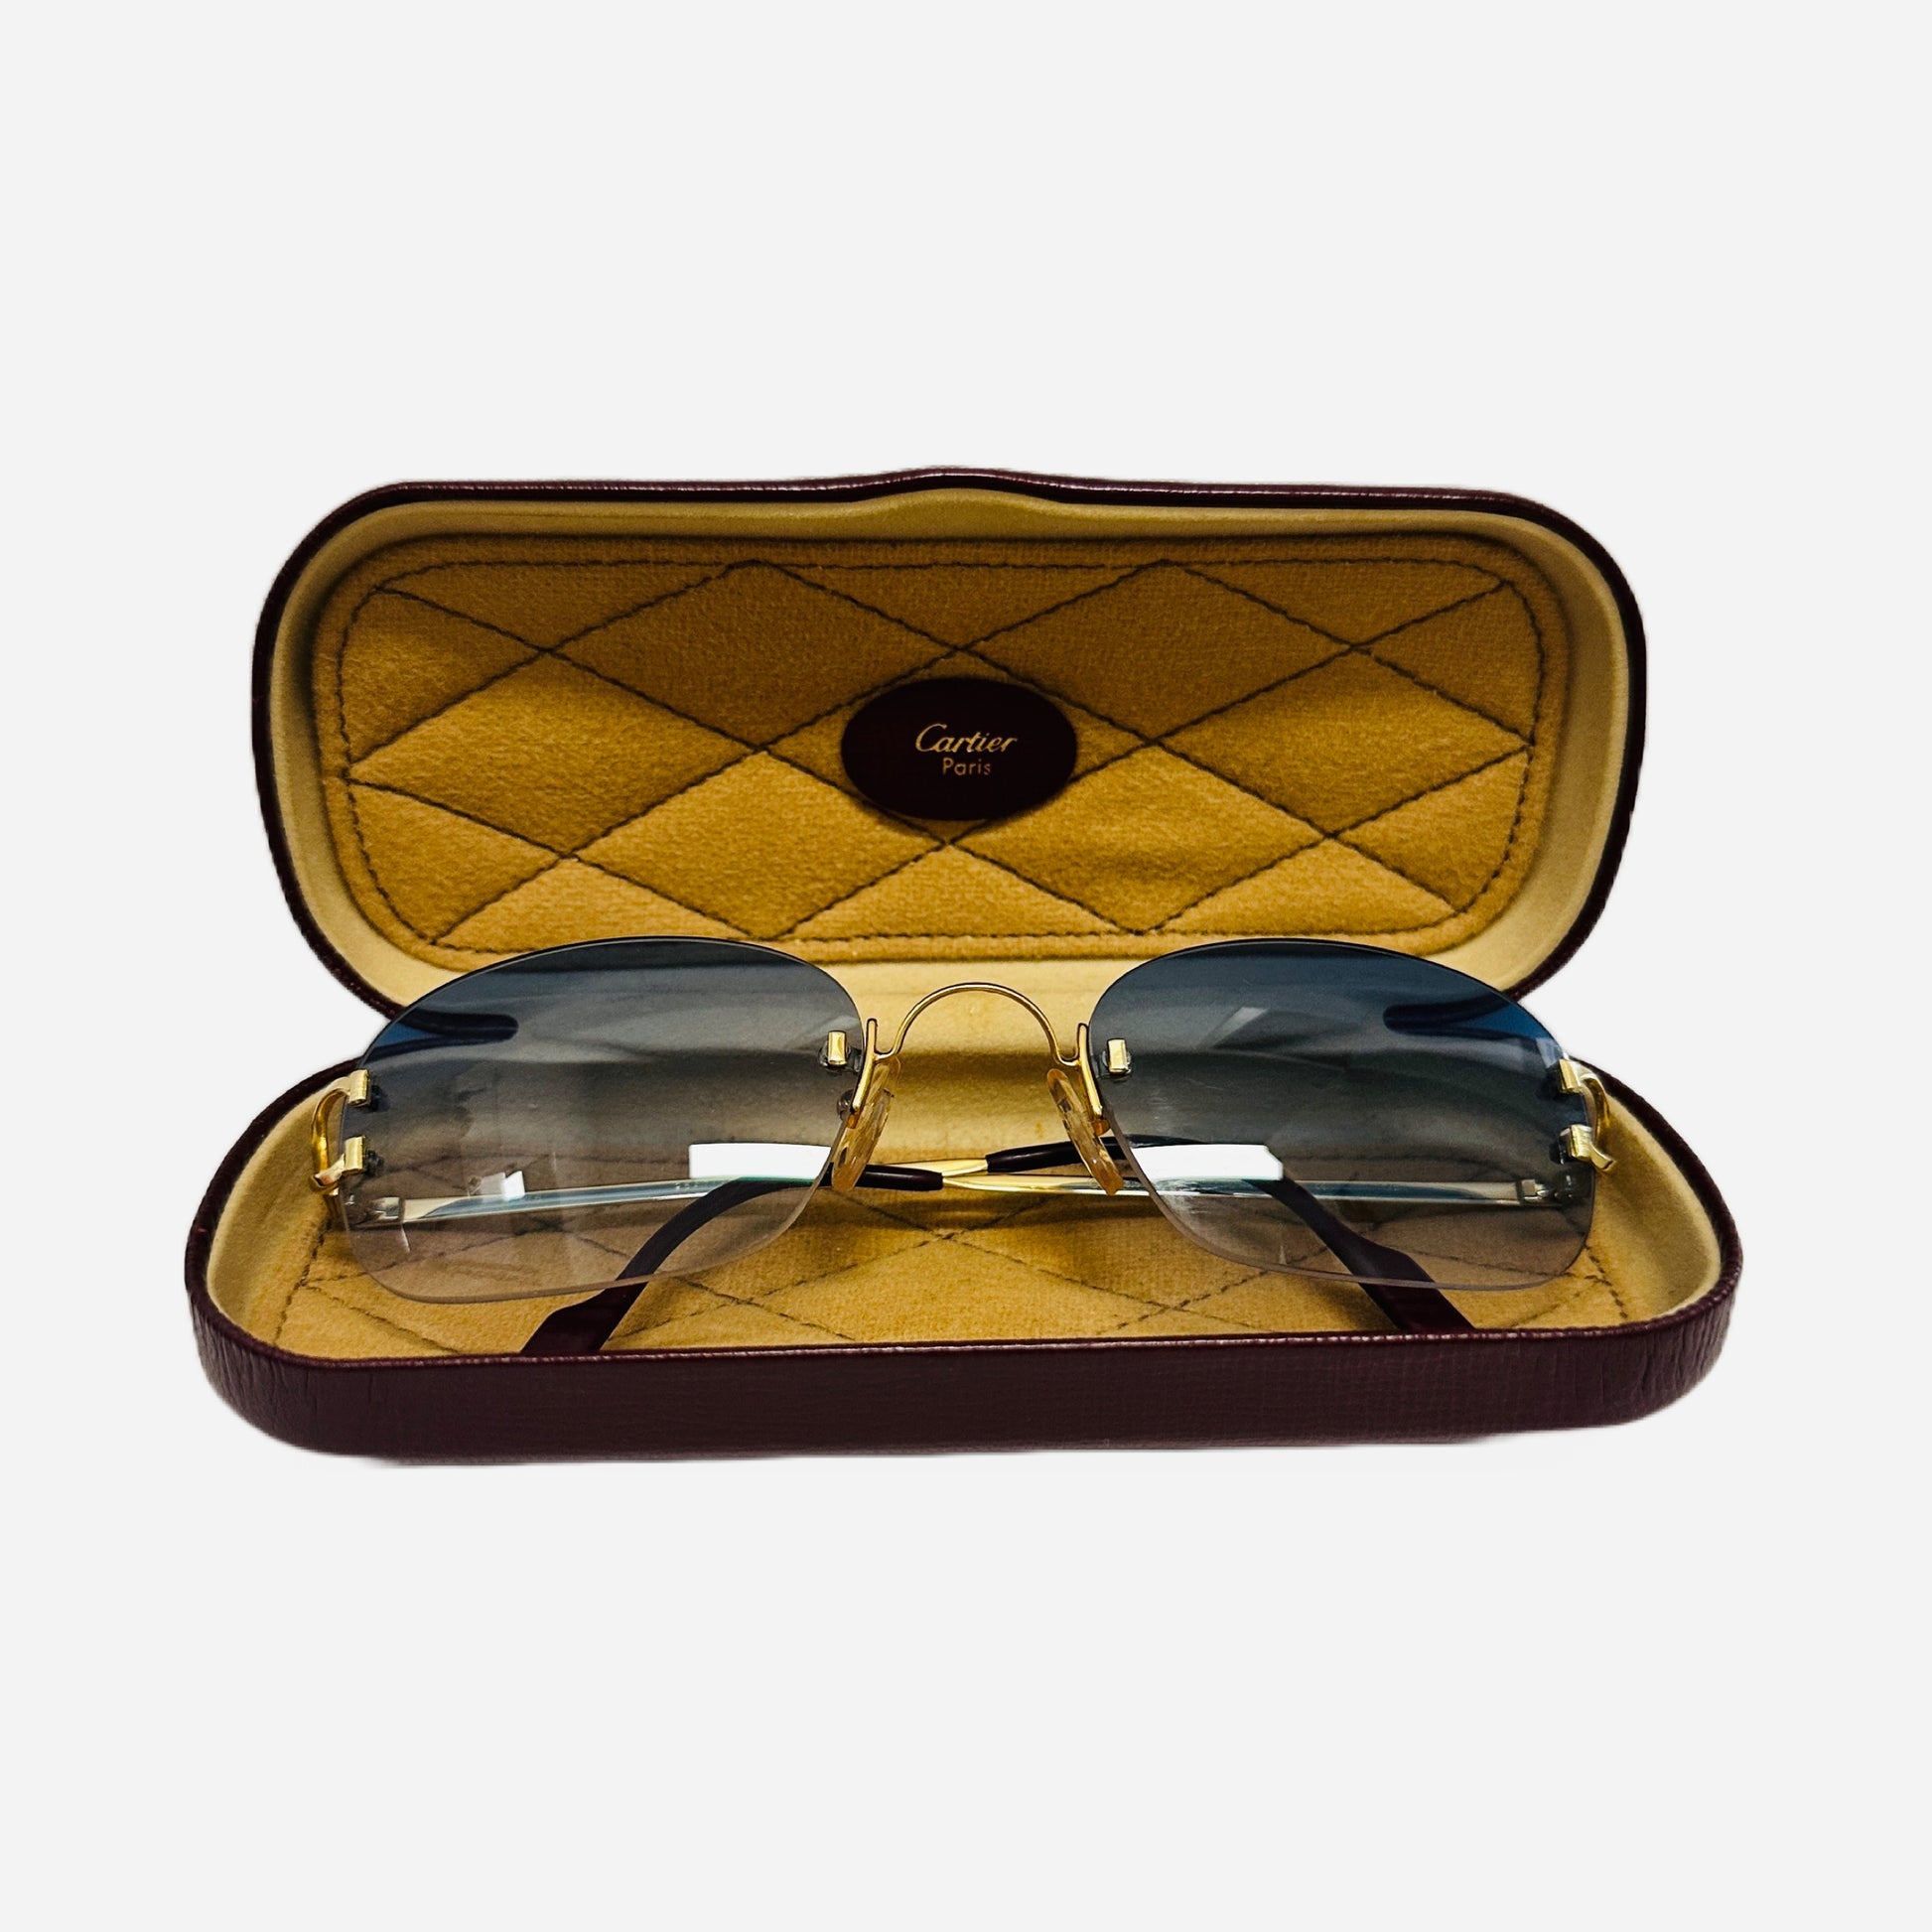 Vintage-Cartier-Big-C-Serrano-Sonnenbrille-Sunglasses-22CT-Carats-Gold-Plated-the-ssekers-box